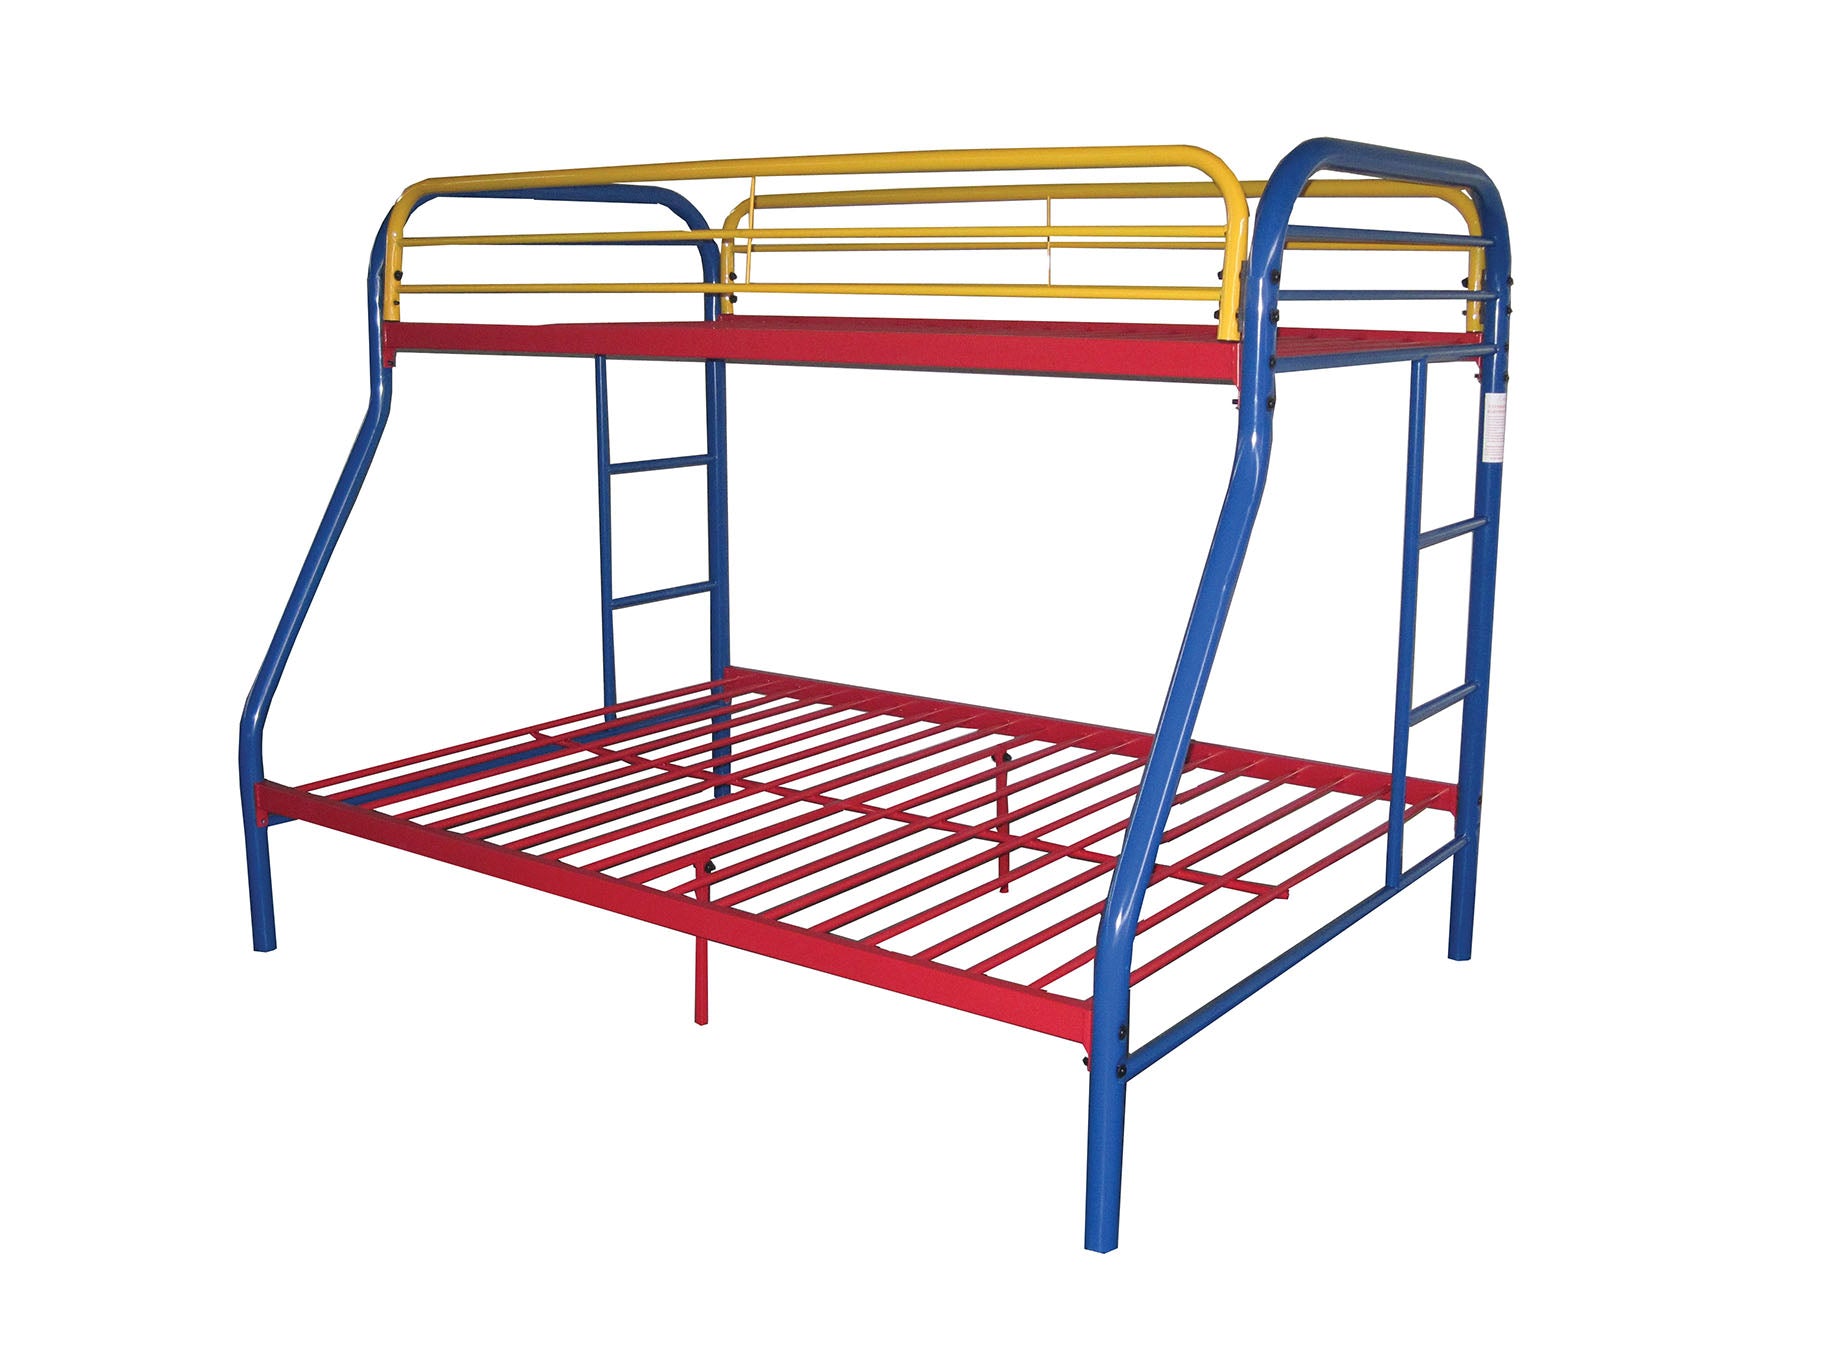 78" X 54" X 60" Twin Over Full Rainbow Metal Tube Bunk Bed Default Title